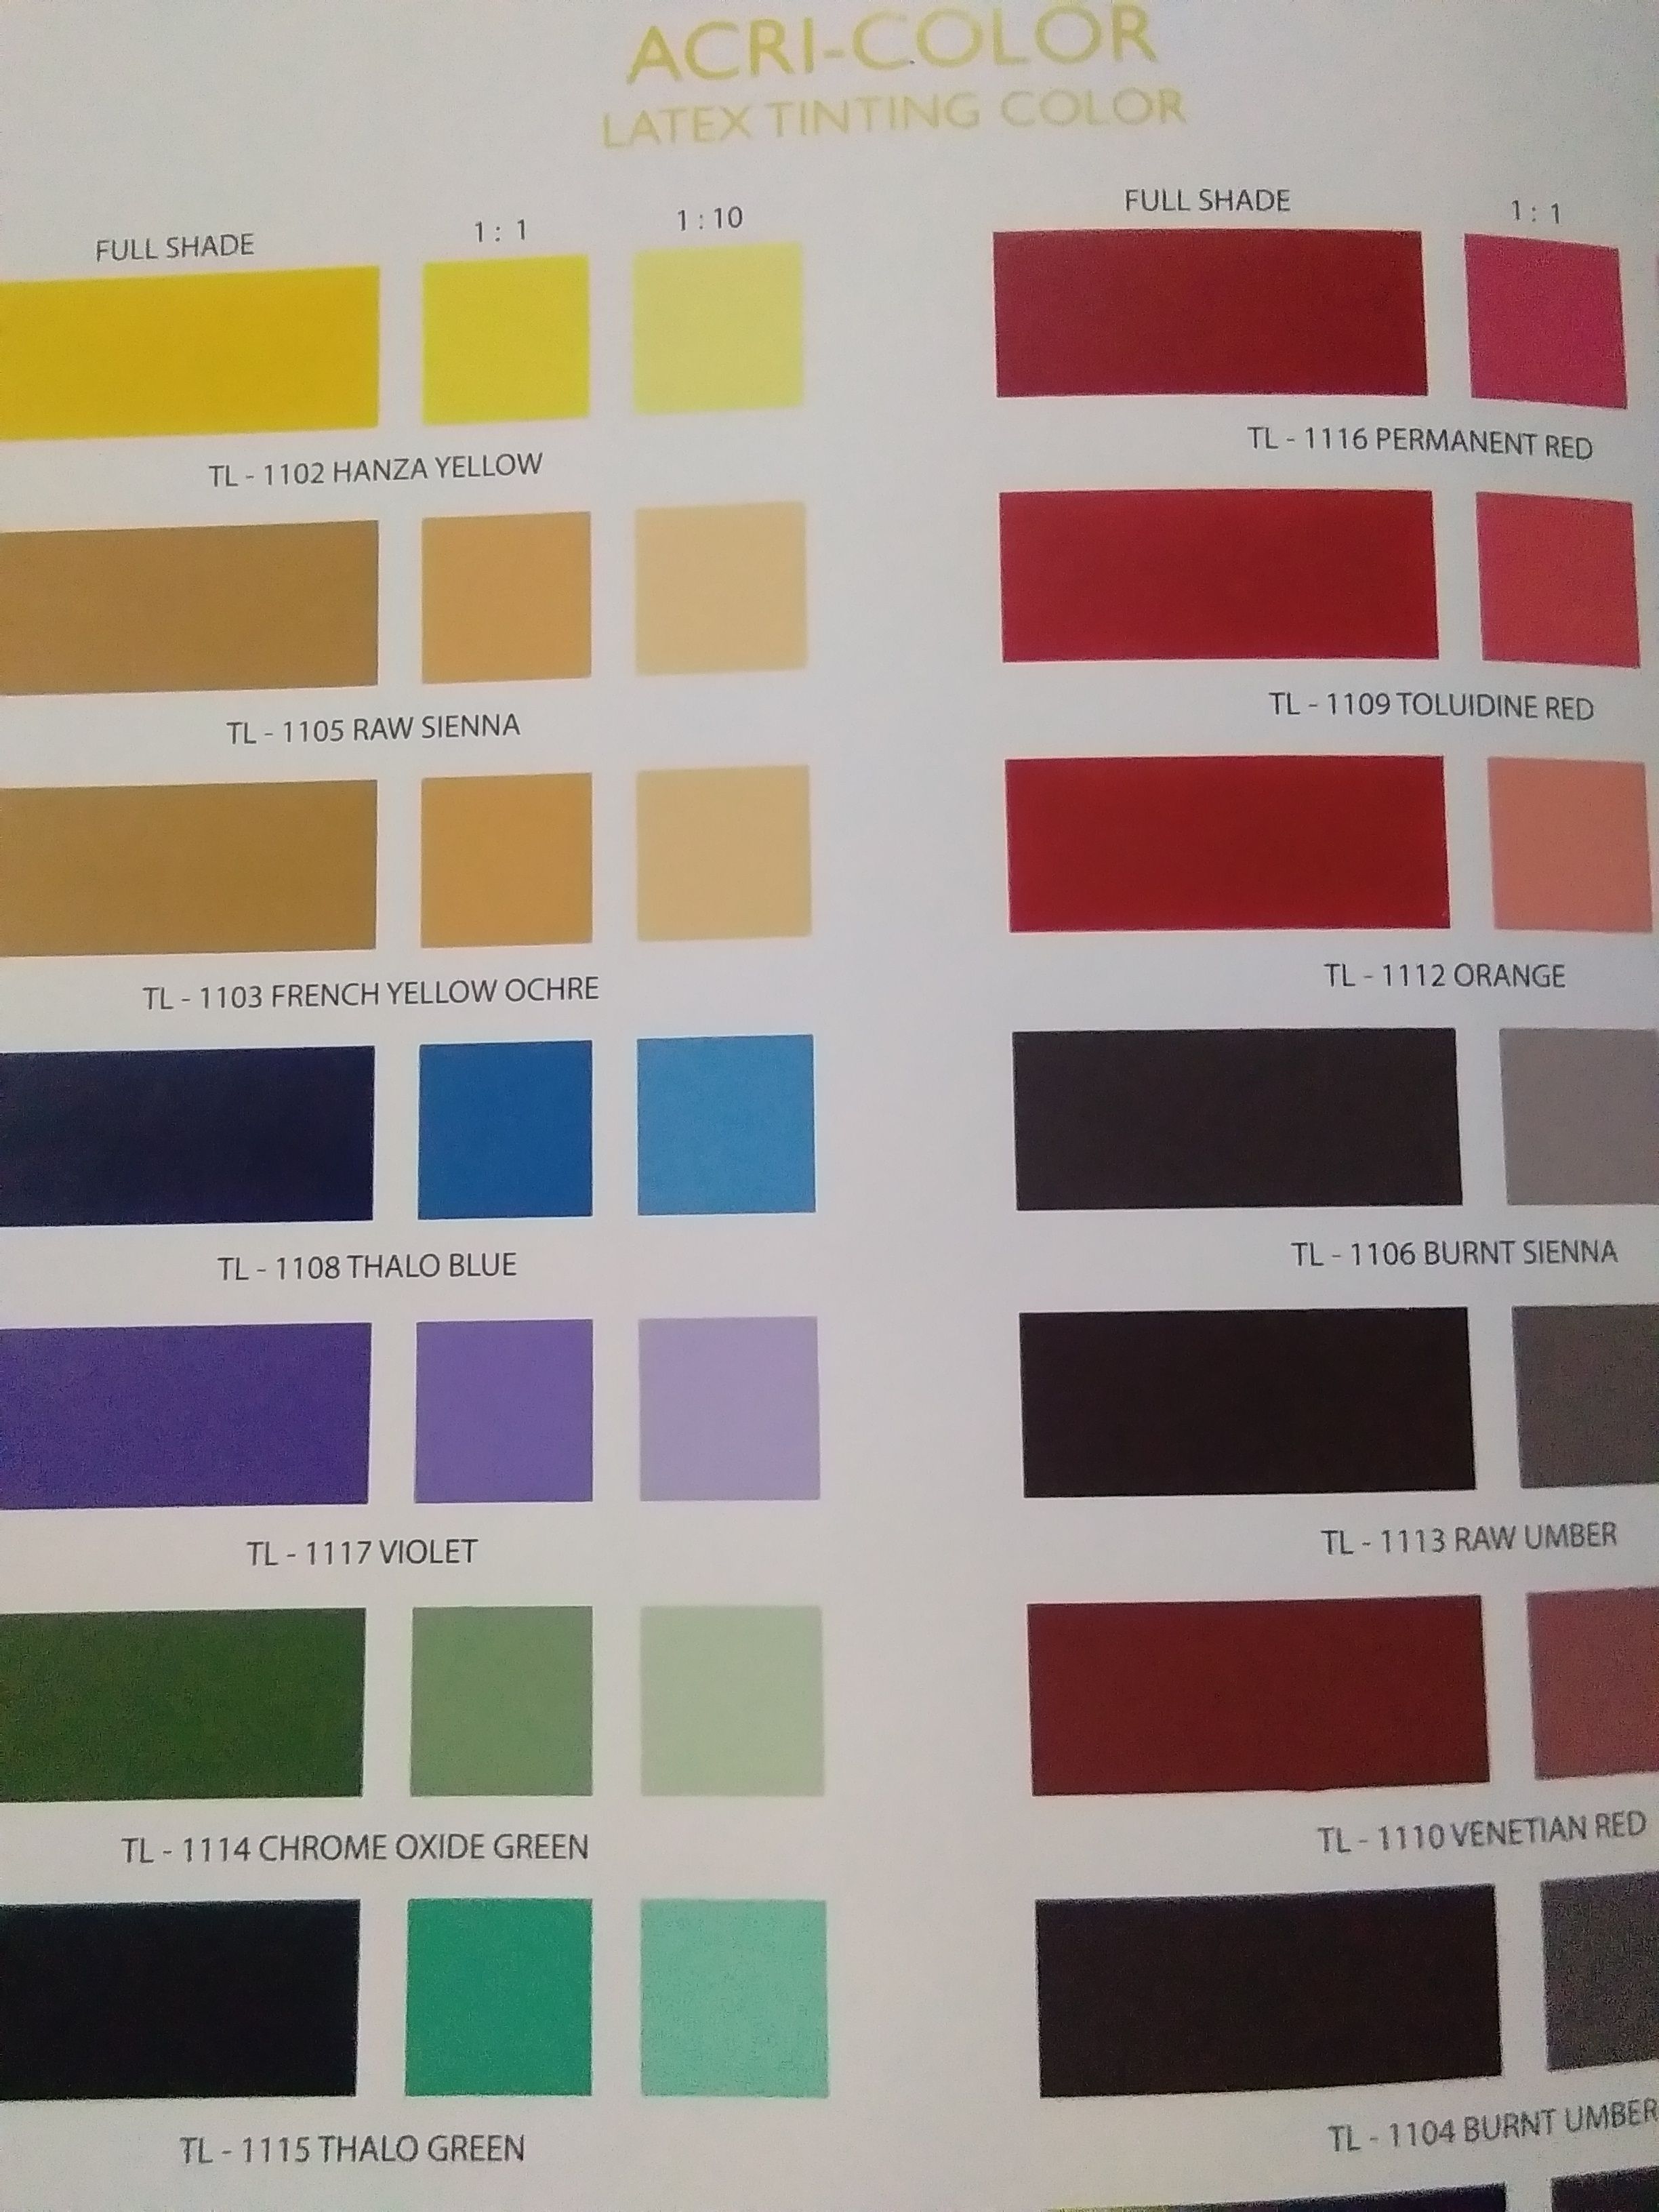 Acri color latex and Tinting Colors in Oil — Steemit